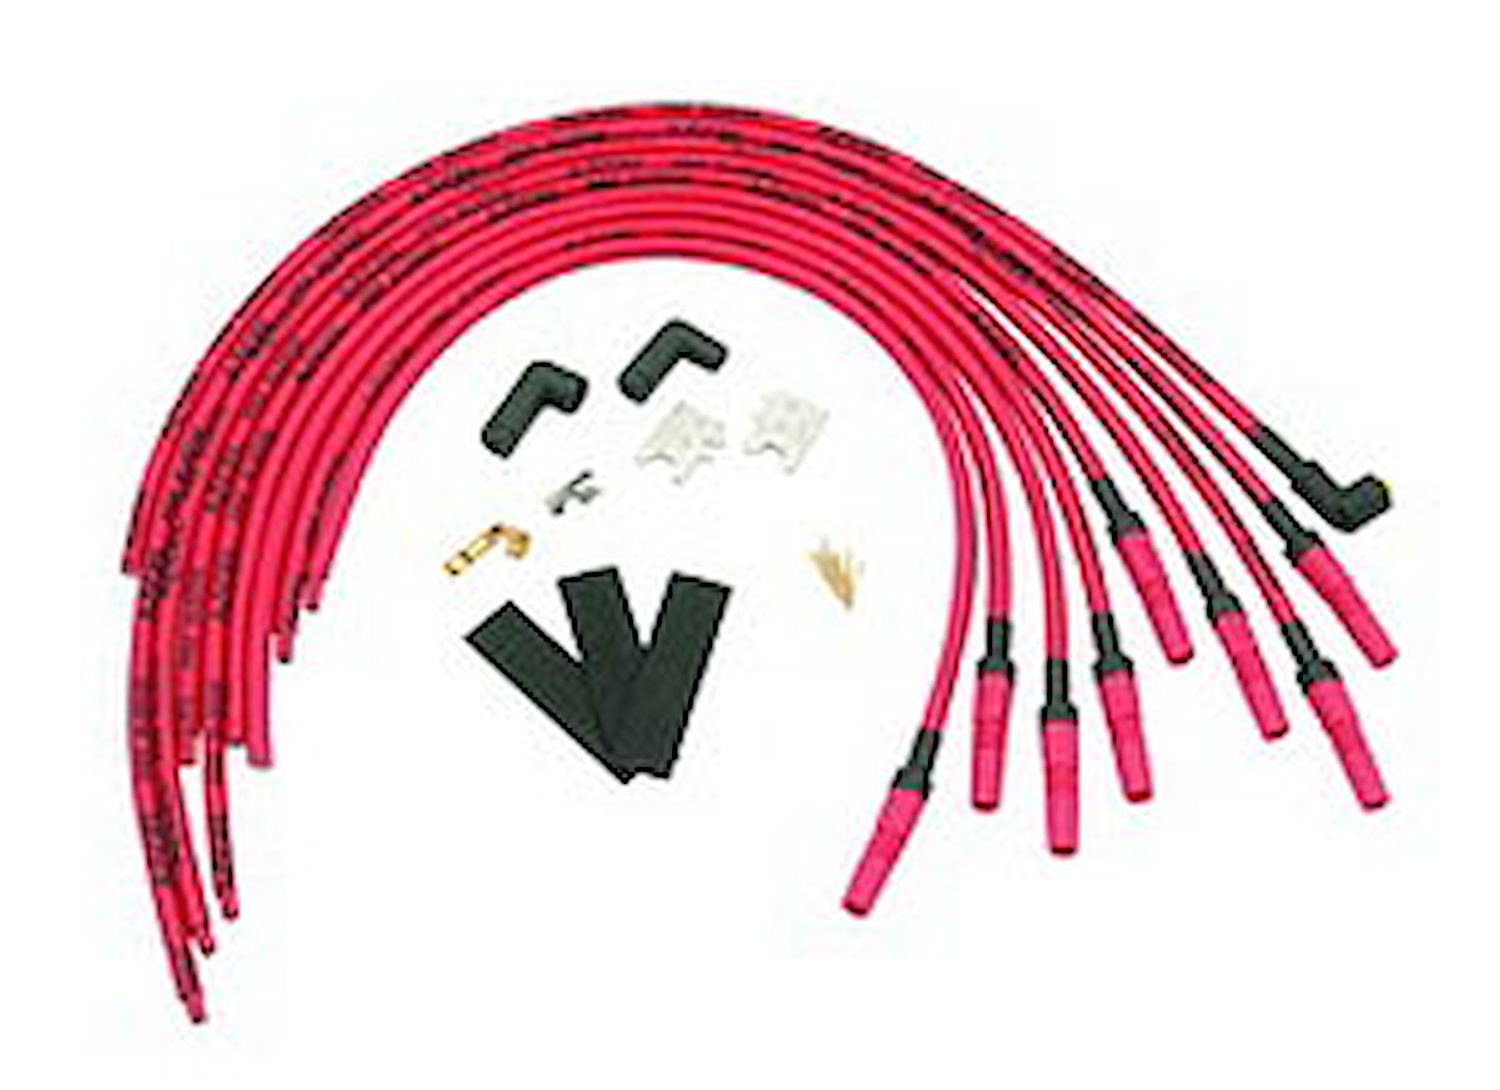 Pro 25 Race Spark Plug Wires 8.8MM Sleeved Universal Kit